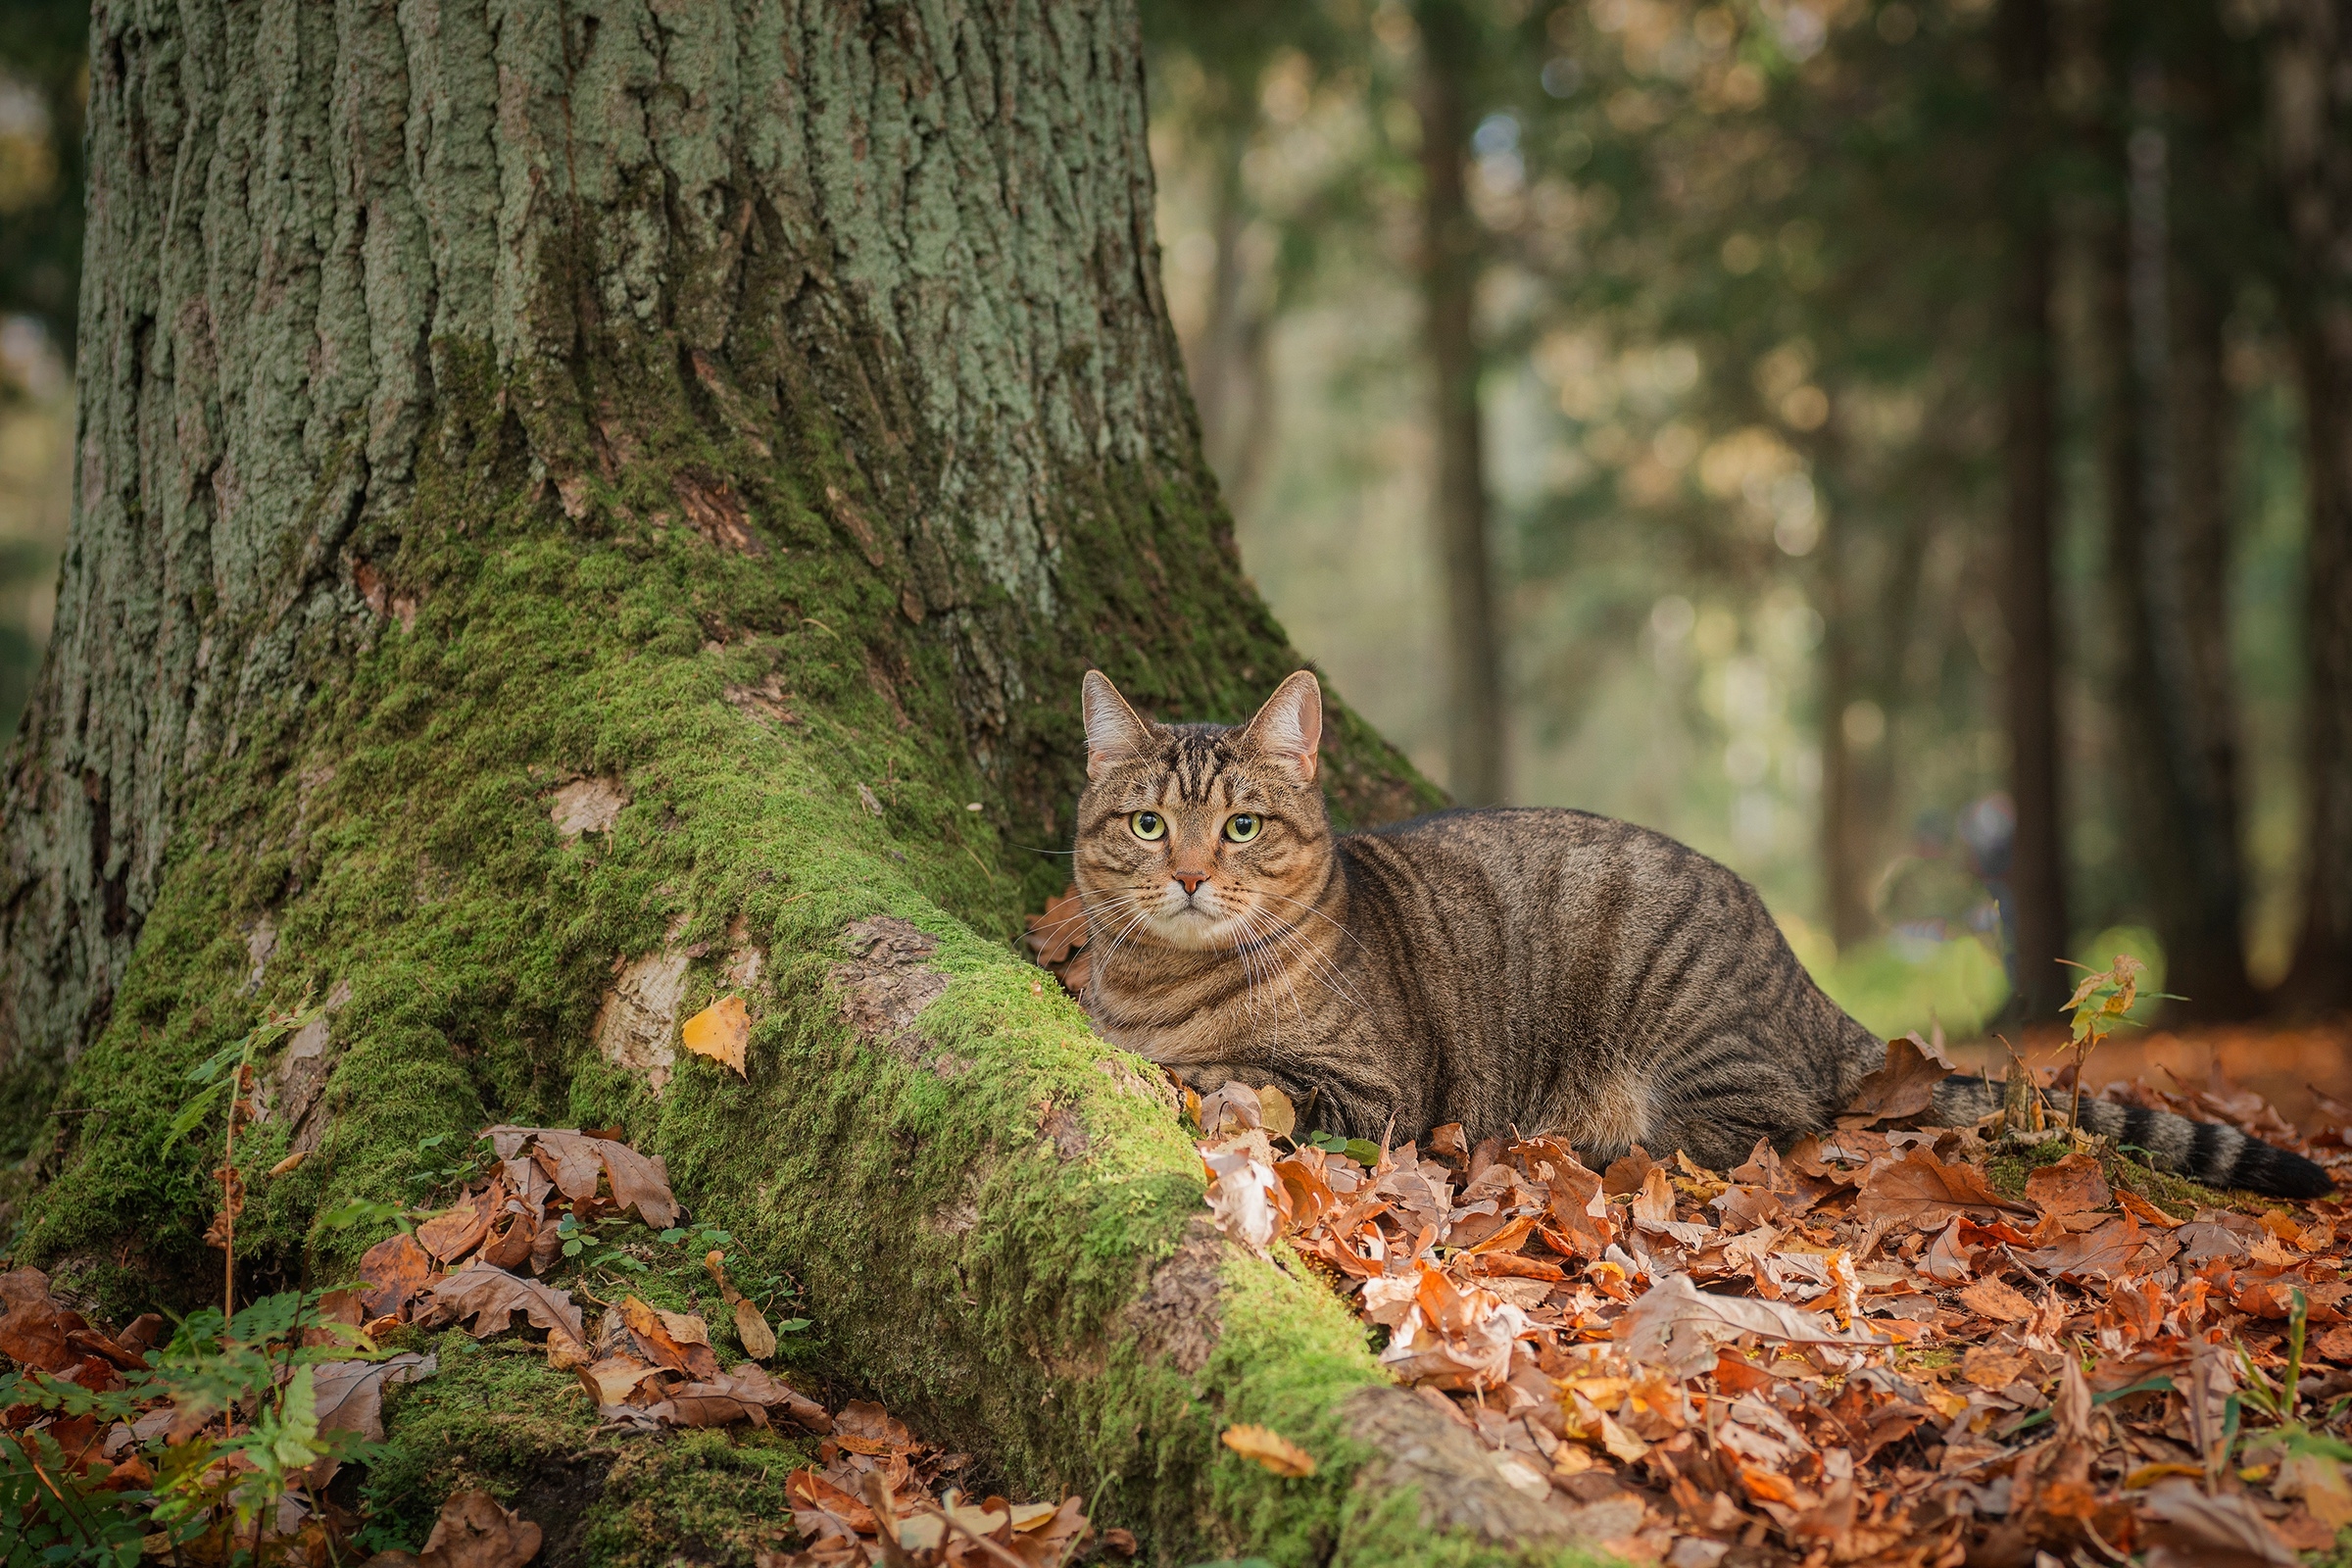 The cat lies by the tree on the fall leaves